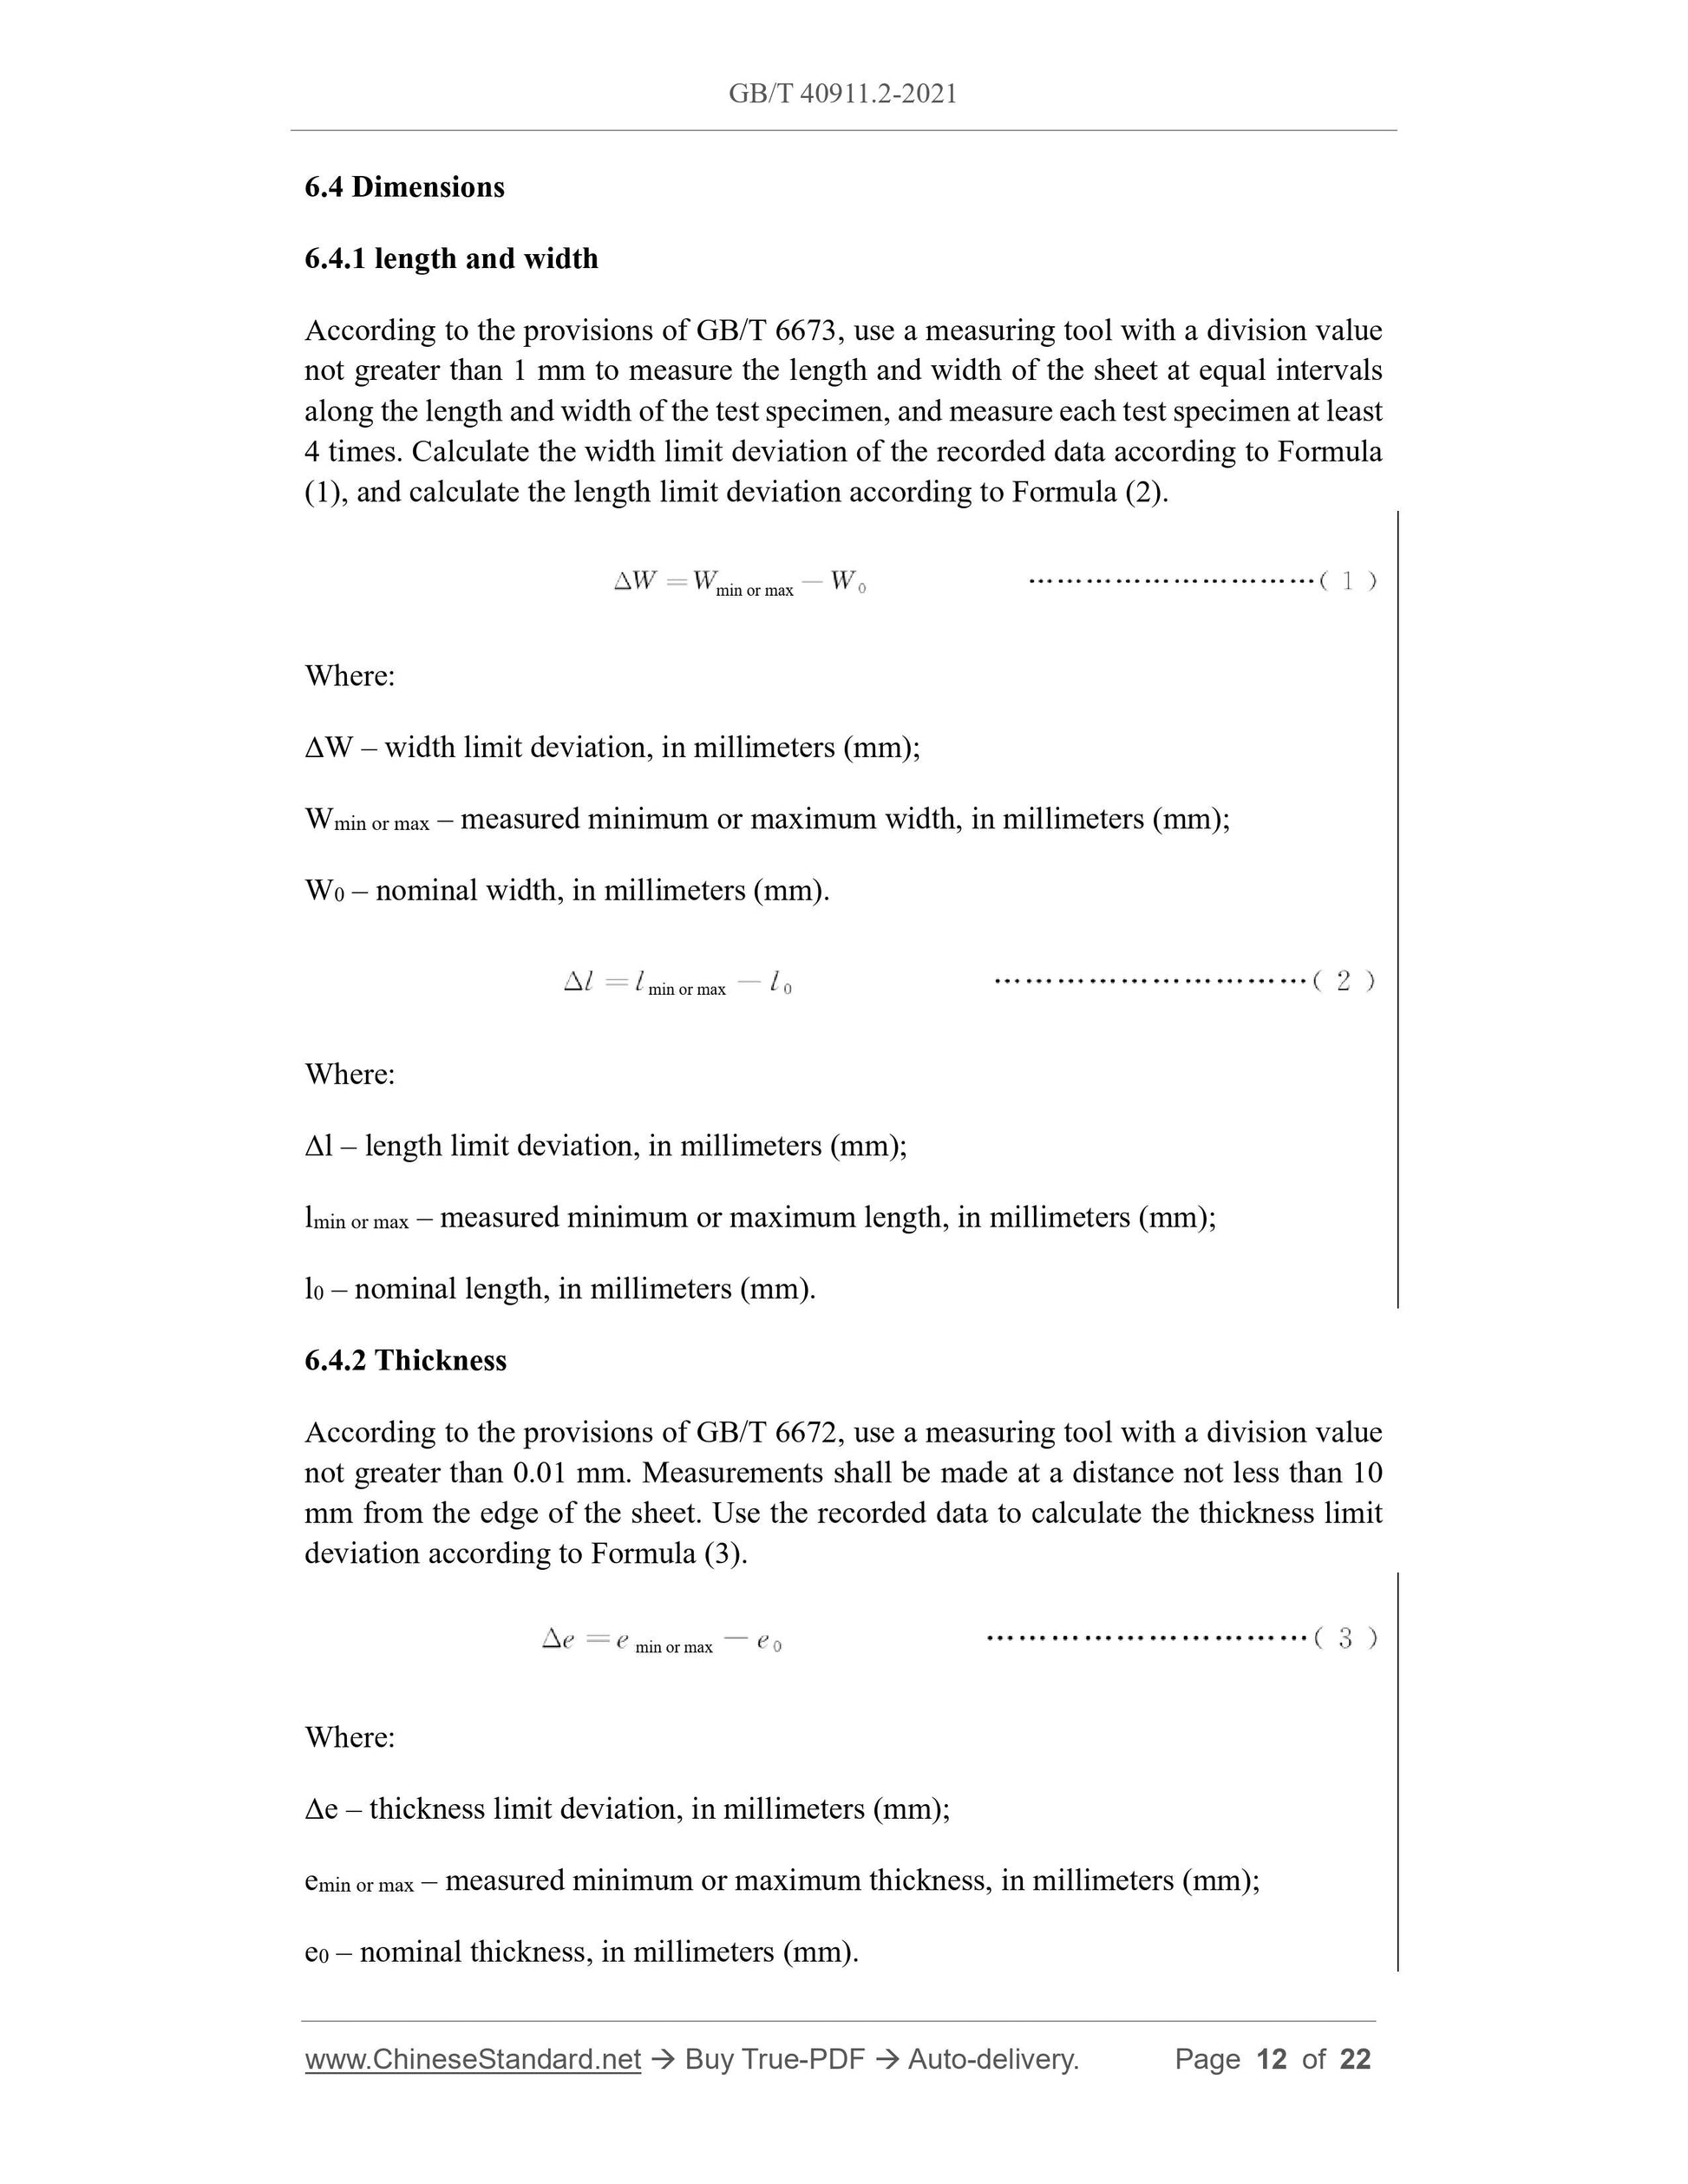 GB/T 40911.2-2021 Page 6